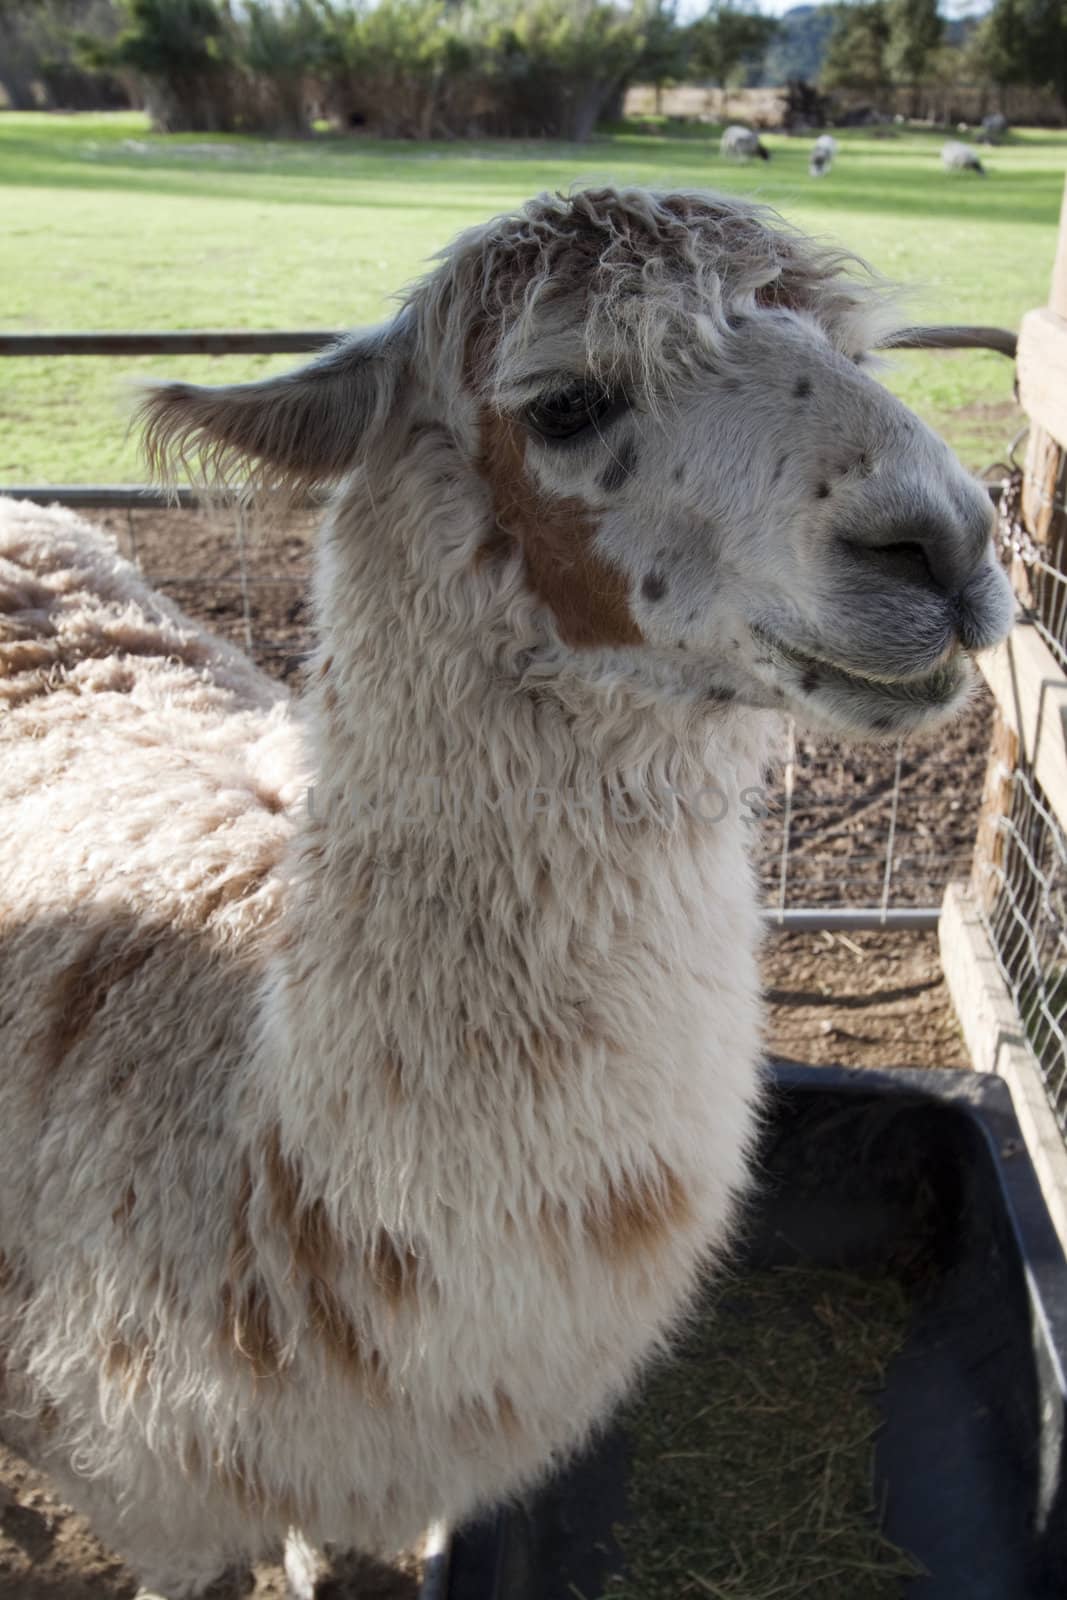 A close up of a llama that seems to be smiling